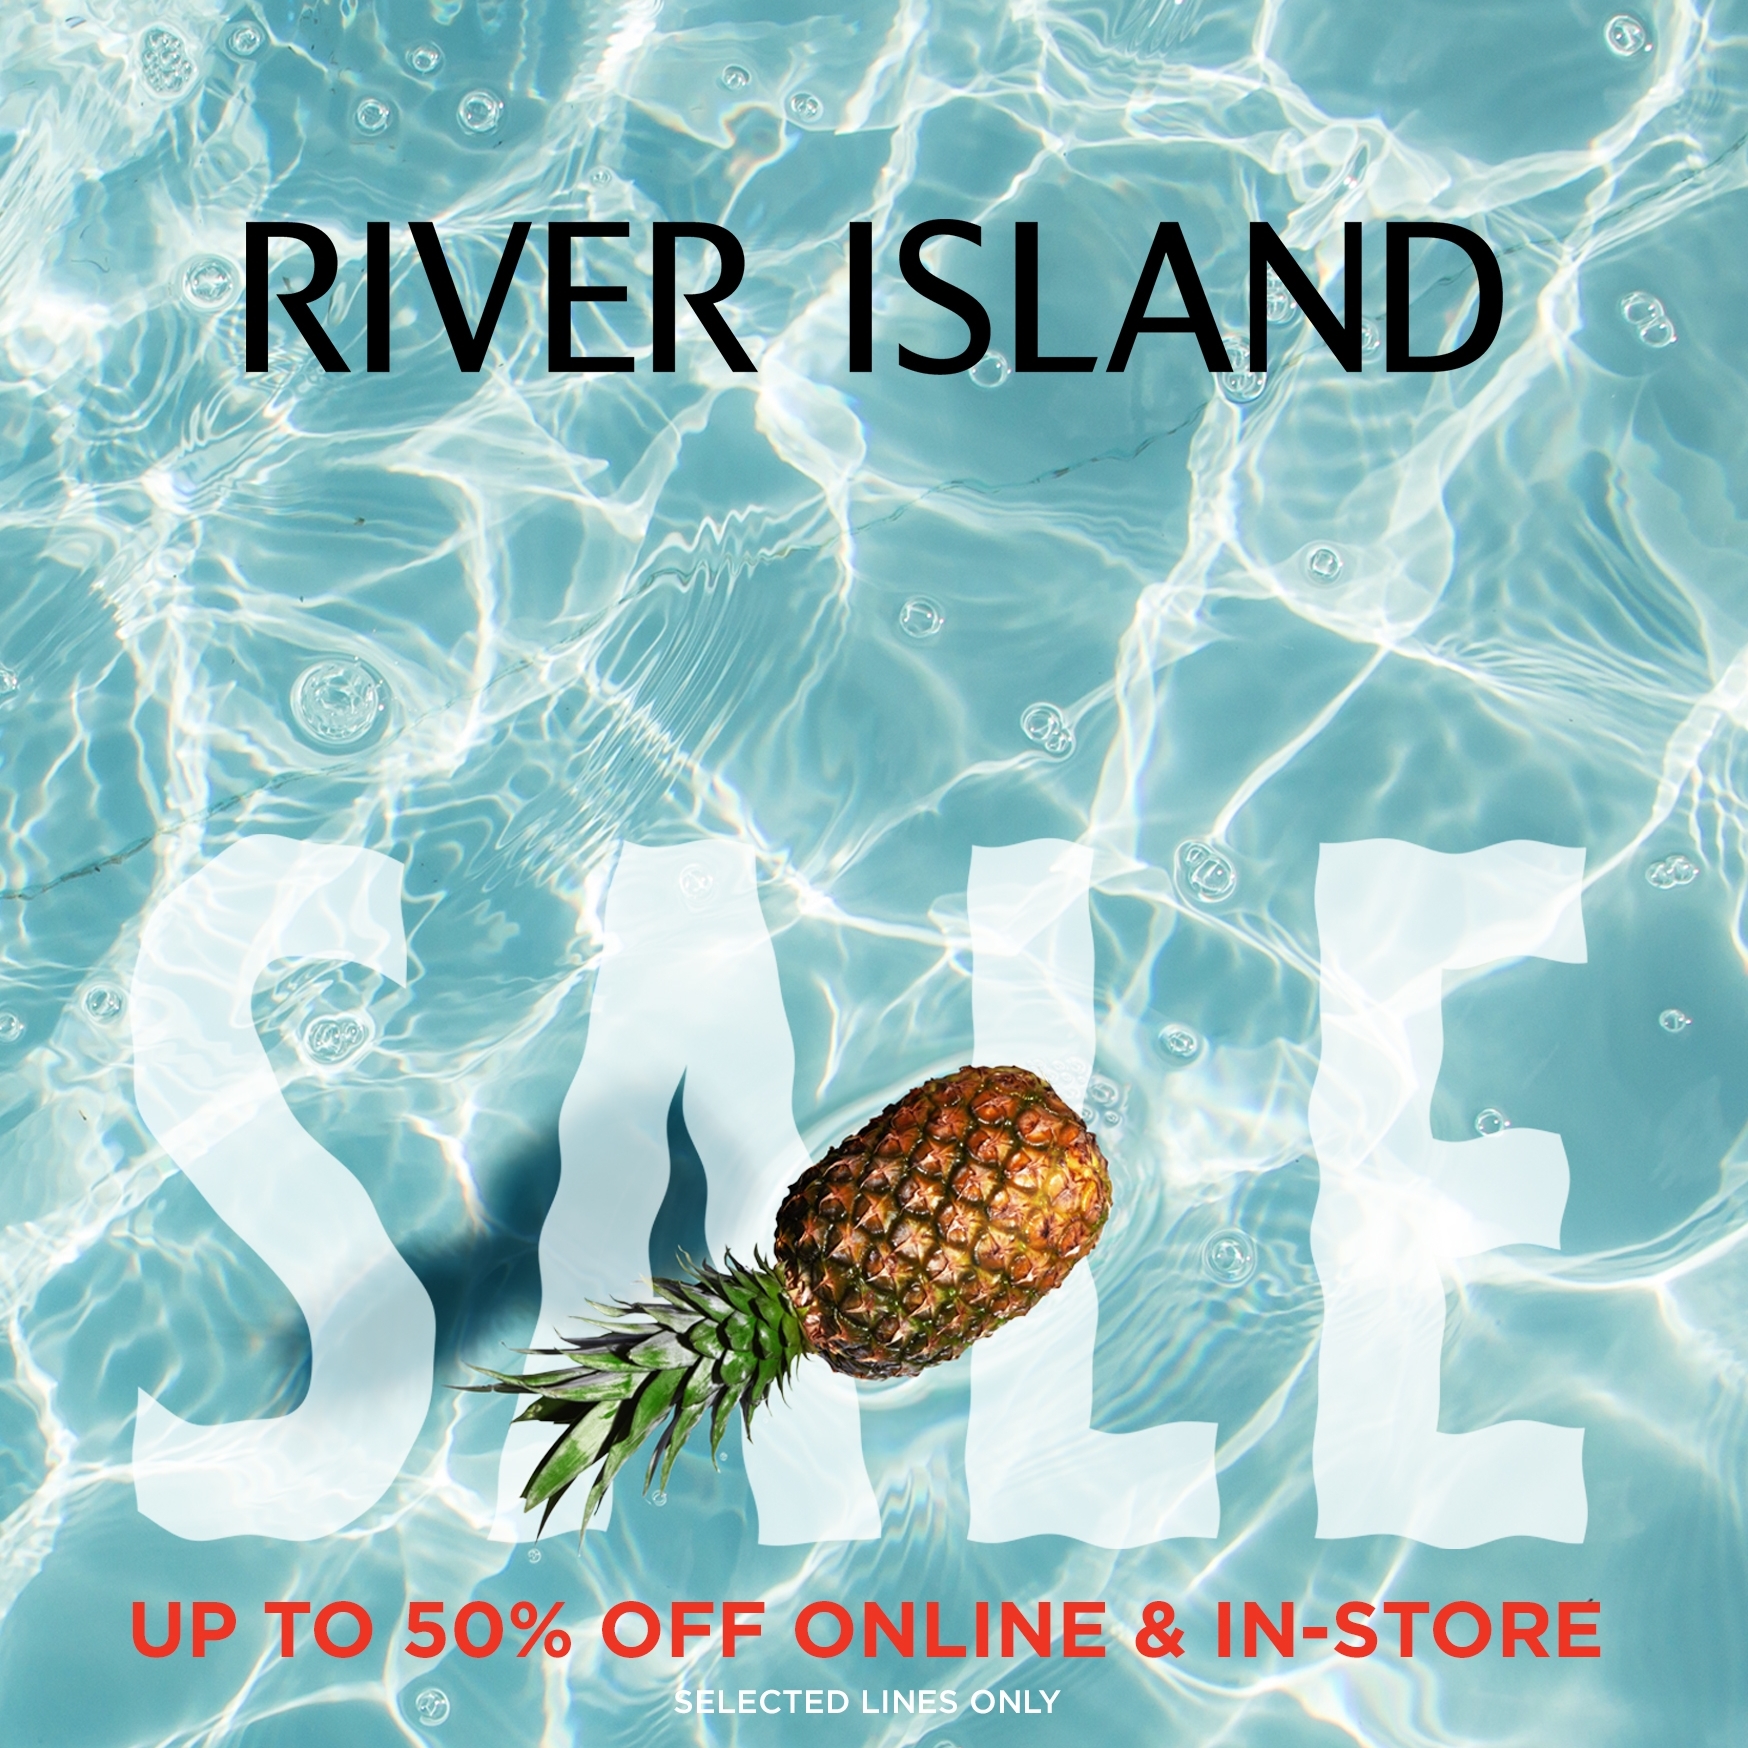 River Island Sale Image The Rock Bury Shopping Centre